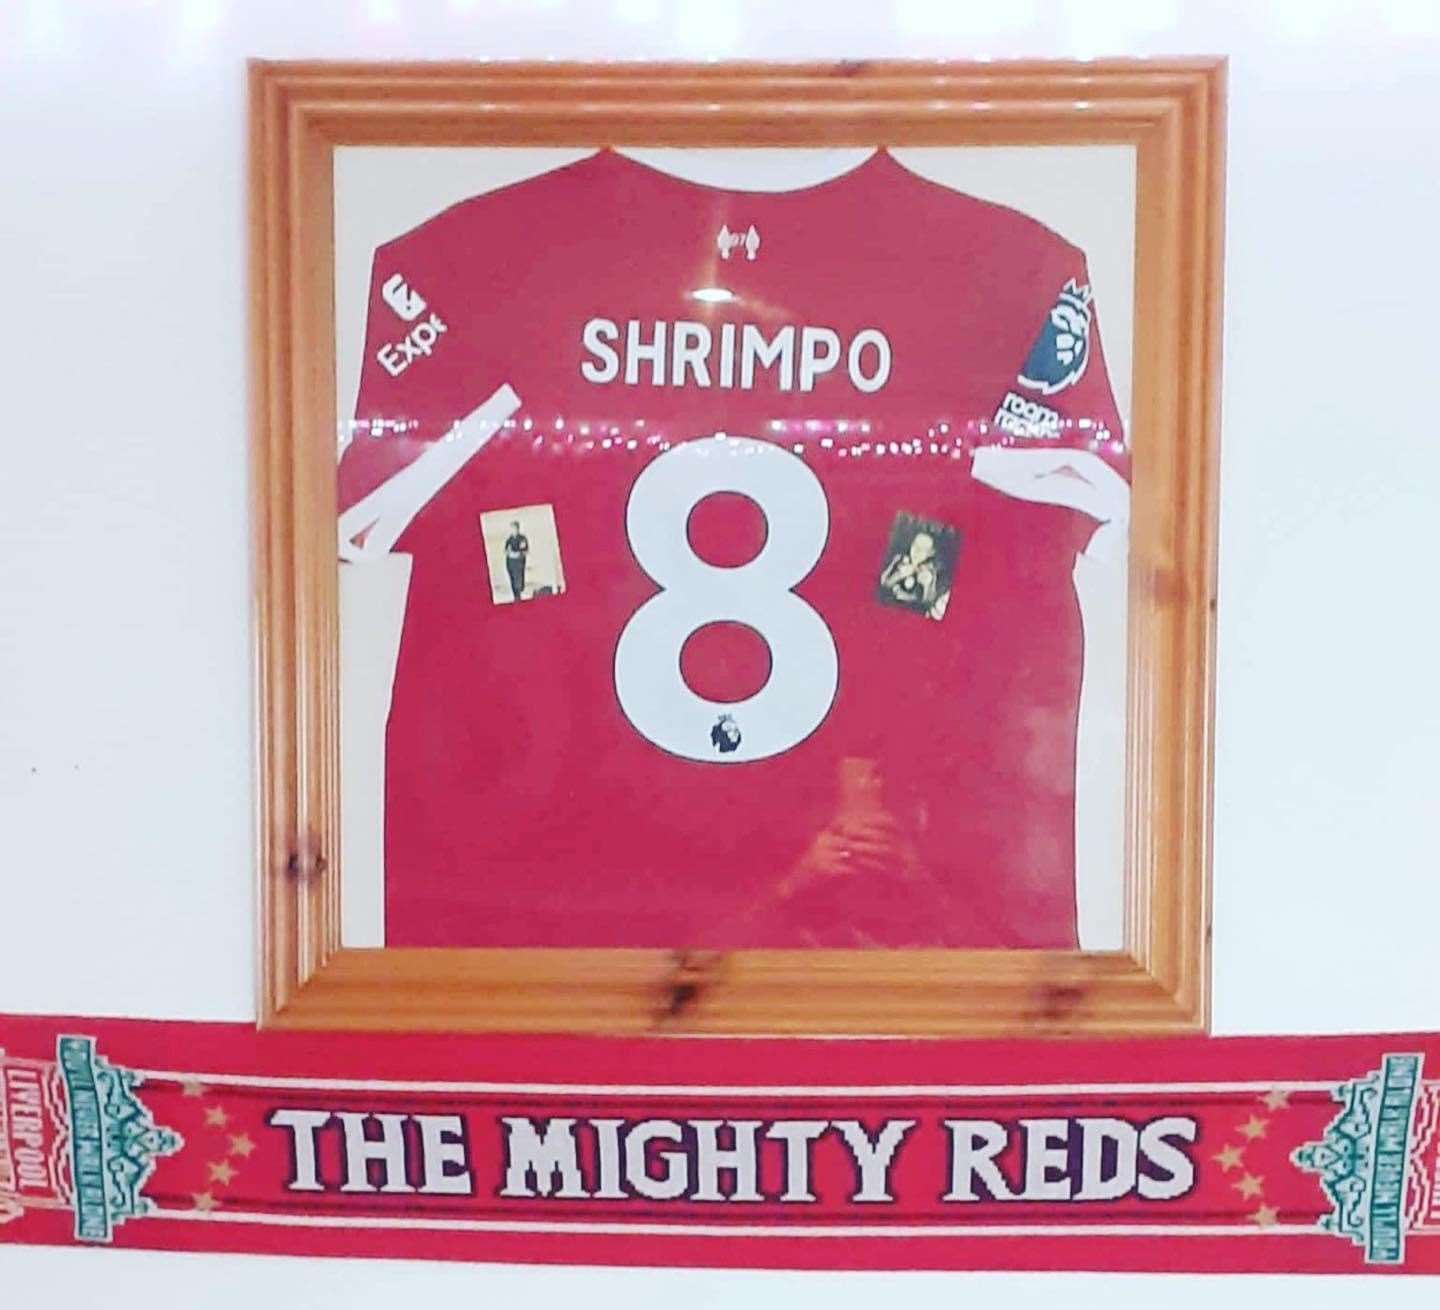 A commemorative Liverpool shirt with Stephen's nickname 'Shrimpo' on the back hangs at Furies in Ramsgate - the pub of the local football team he passionately supported